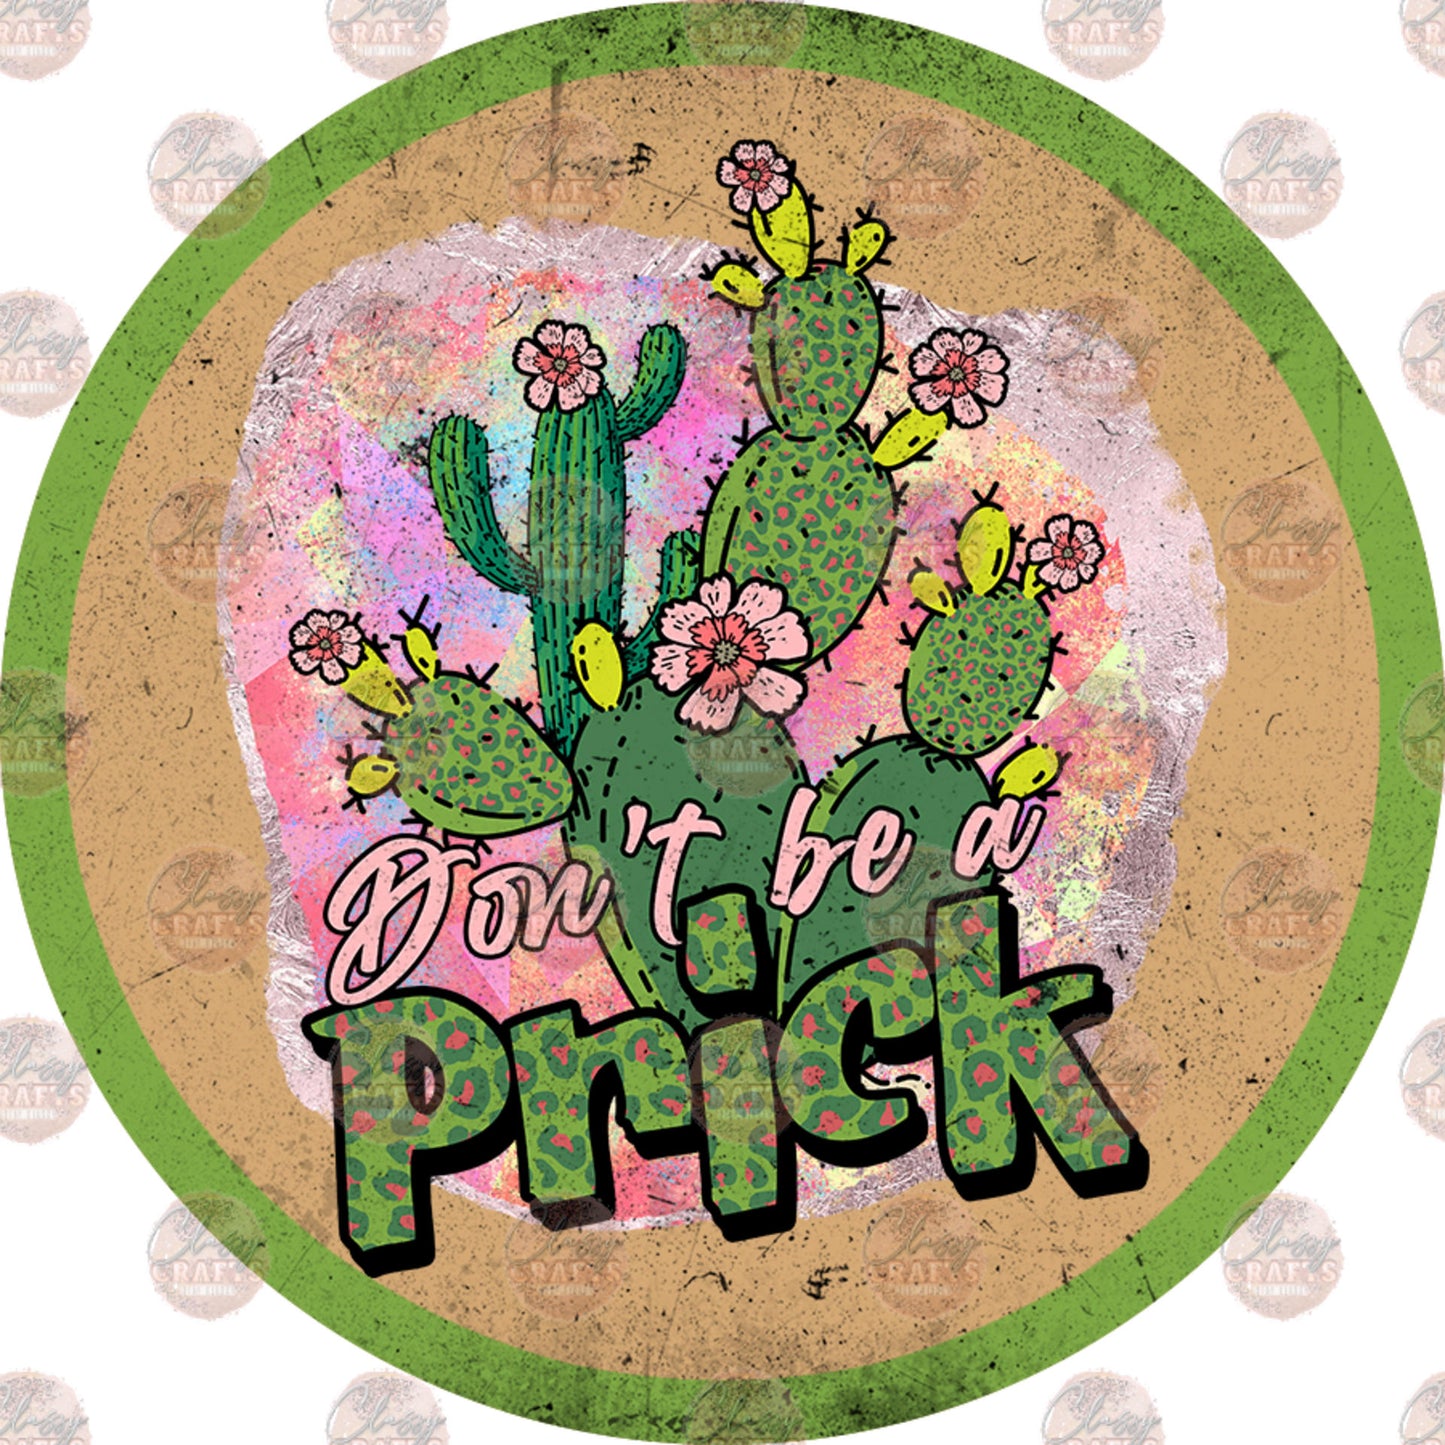 Don't Be A Prick Car Coaster - Sublimation Transfer